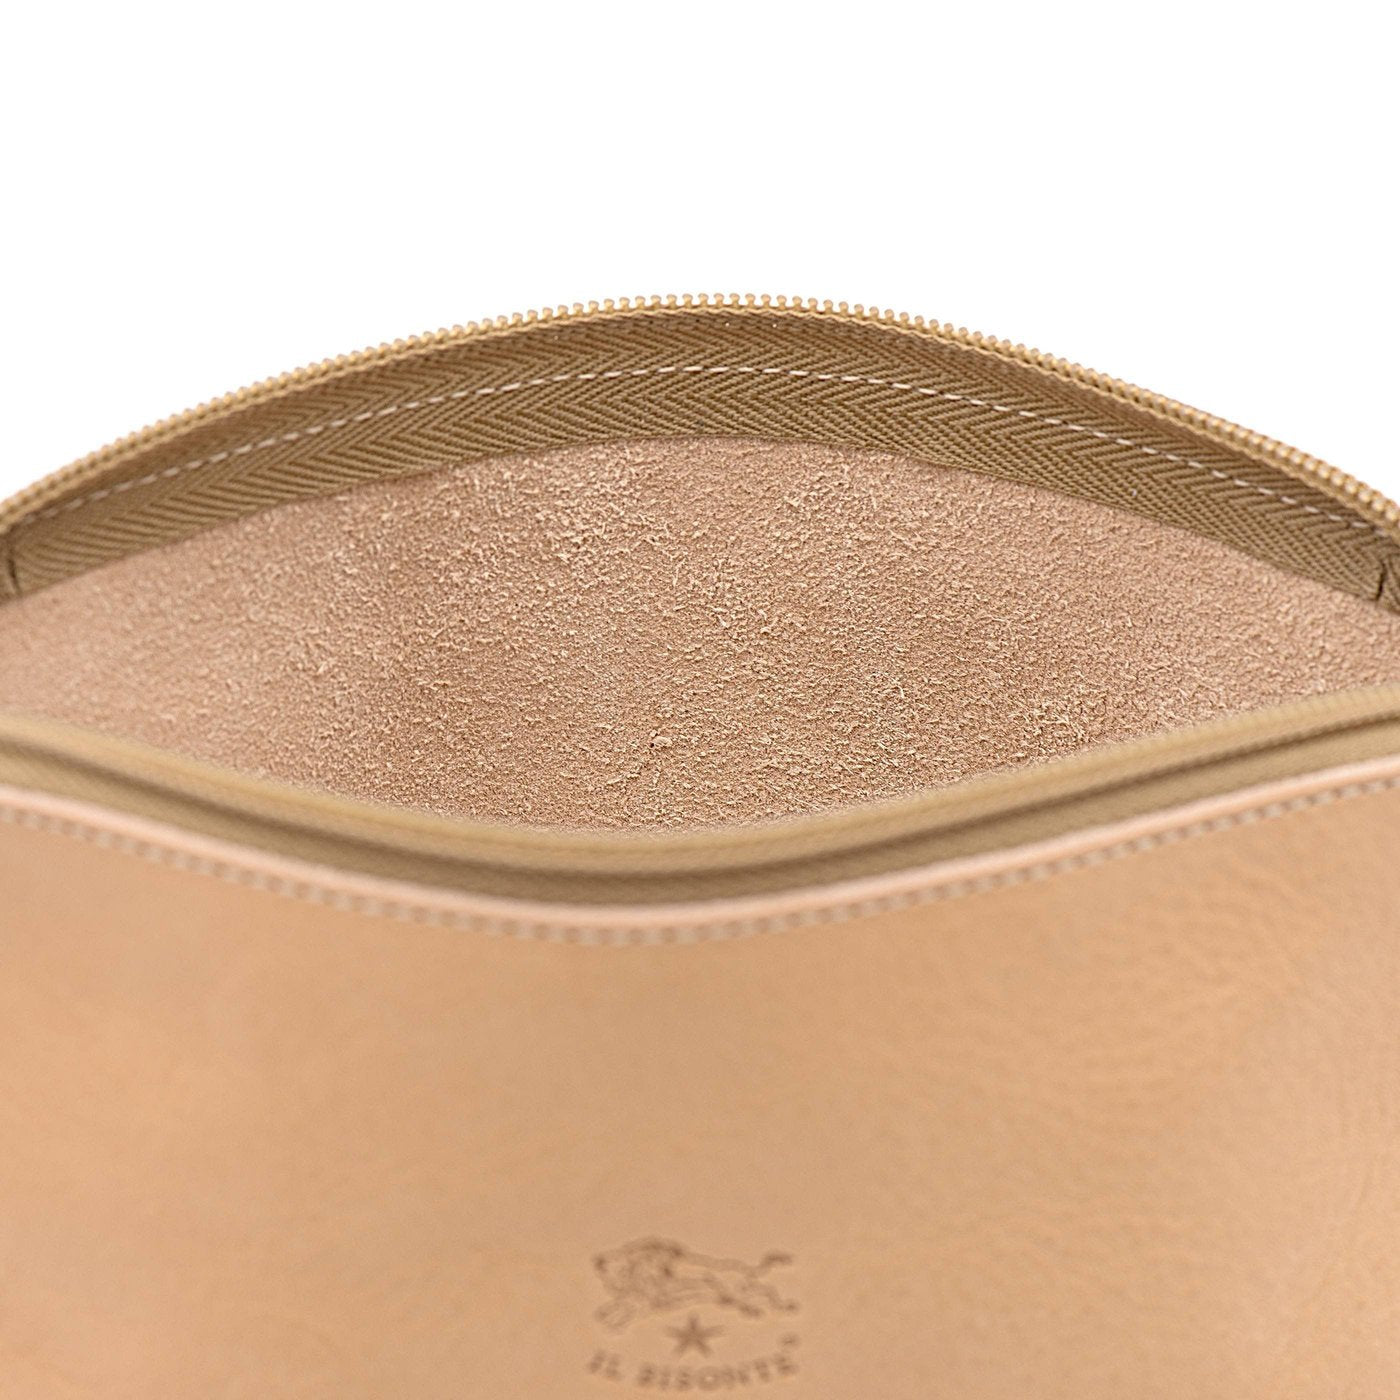 Women's case in calf leather color natural